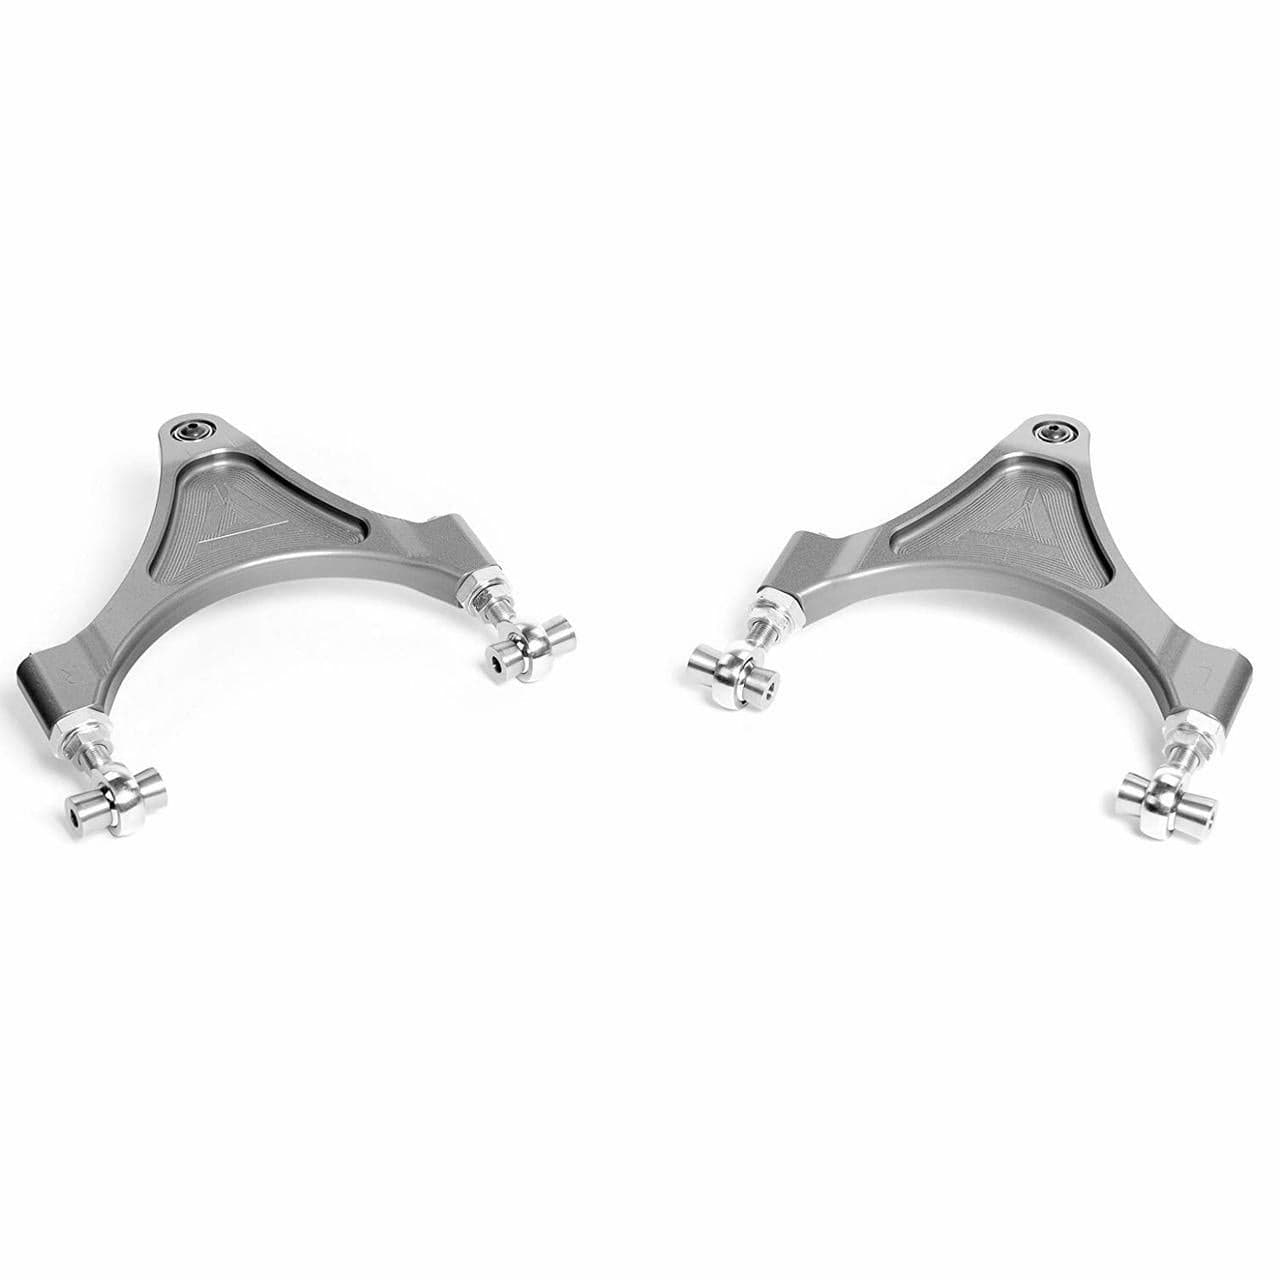 Voodoo13 Upper Control Arms (Front) - 2003-2008 Nissan 350Z